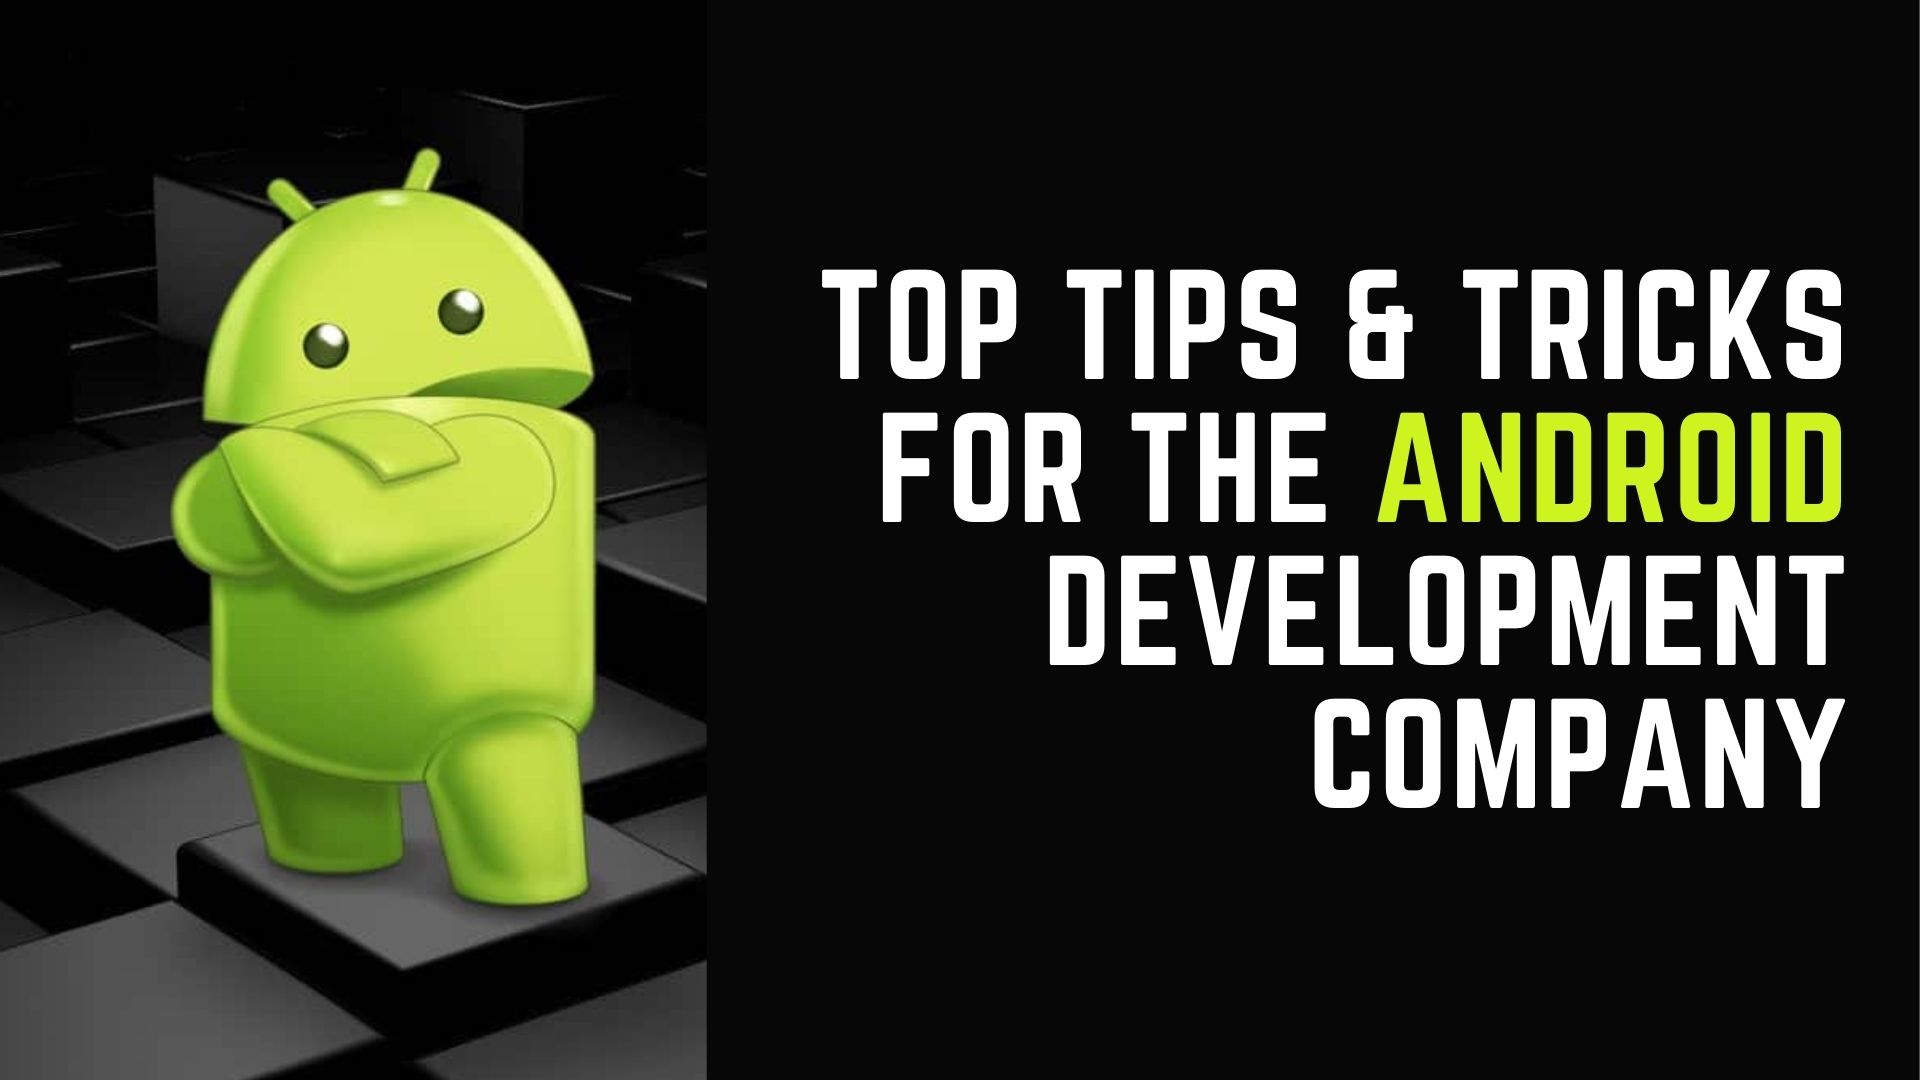 Top Tips & Tricks For The Android Development Company